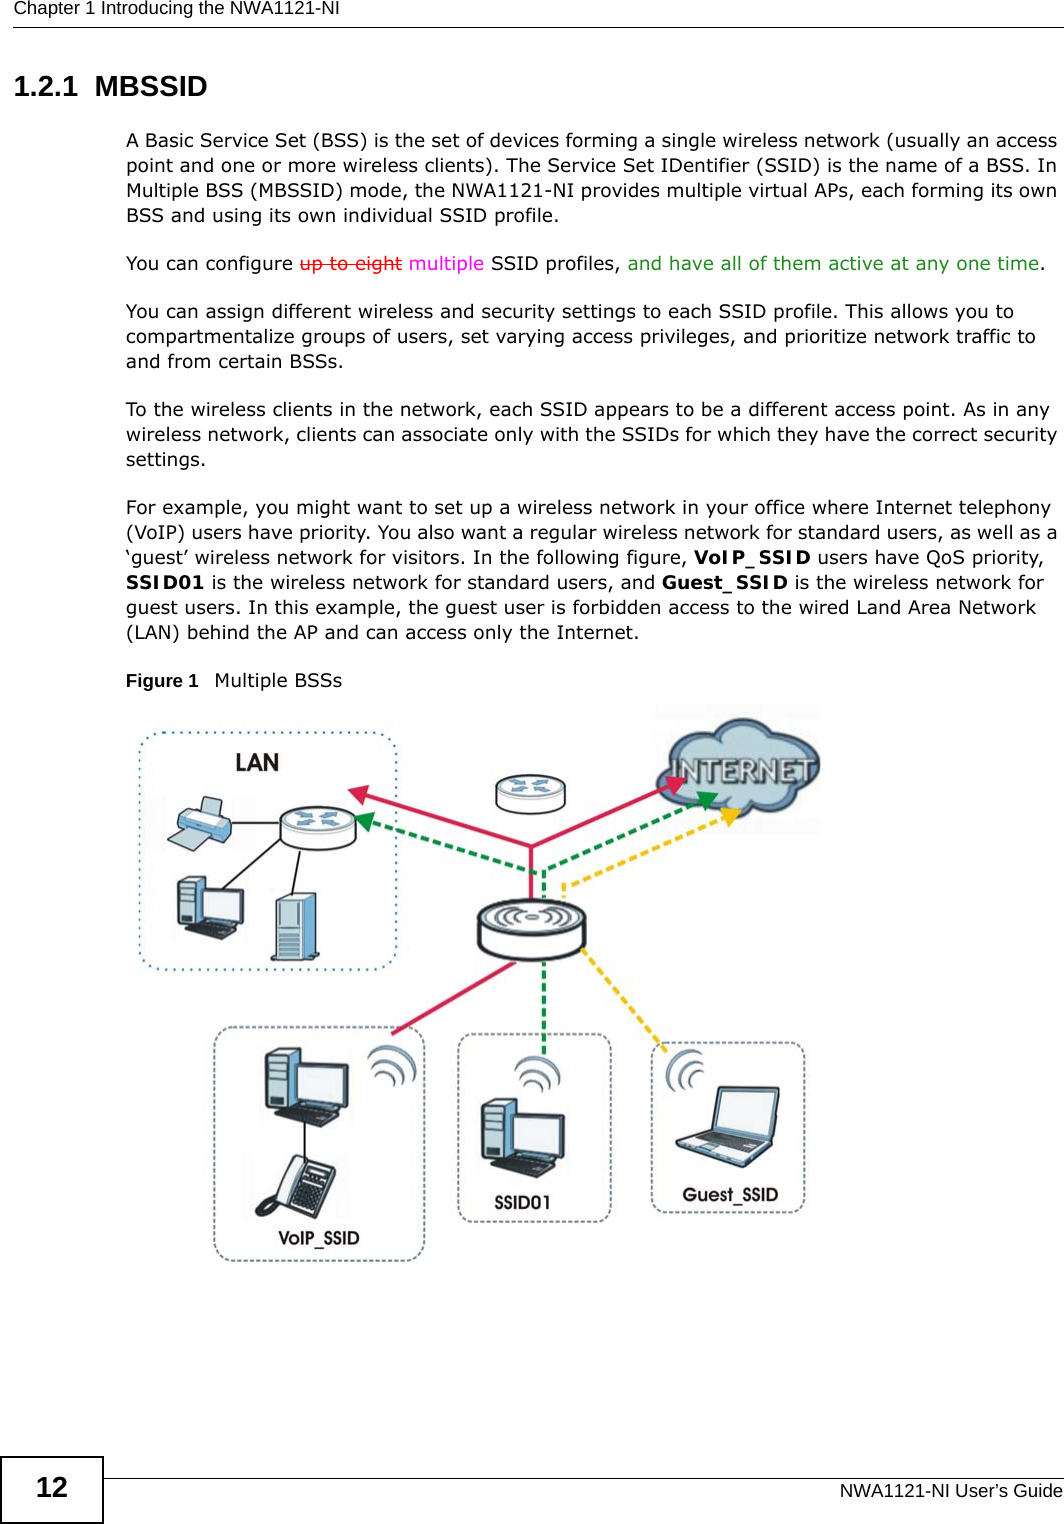 Chapter 1 Introducing the NWA1121-NINWA1121-NI User’s Guide121.2.1  MBSSIDA Basic Service Set (BSS) is the set of devices forming a single wireless network (usually an access point and one or more wireless clients). The Service Set IDentifier (SSID) is the name of a BSS. In Multiple BSS (MBSSID) mode, the NWA1121-NI provides multiple virtual APs, each forming its own BSS and using its own individual SSID profile.You can configure up to eight multiple SSID profiles, and have all of them active at any one time.You can assign different wireless and security settings to each SSID profile. This allows you to compartmentalize groups of users, set varying access privileges, and prioritize network traffic to and from certain BSSs.To the wireless clients in the network, each SSID appears to be a different access point. As in any wireless network, clients can associate only with the SSIDs for which they have the correct security settings.For example, you might want to set up a wireless network in your office where Internet telephony (VoIP) users have priority. You also want a regular wireless network for standard users, as well as a ‘guest’ wireless network for visitors. In the following figure, VoIP_SSID users have QoS priority, SSID01 is the wireless network for standard users, and Guest_SSID is the wireless network for guest users. In this example, the guest user is forbidden access to the wired Land Area Network (LAN) behind the AP and can access only the Internet.Figure 1   Multiple BSSs